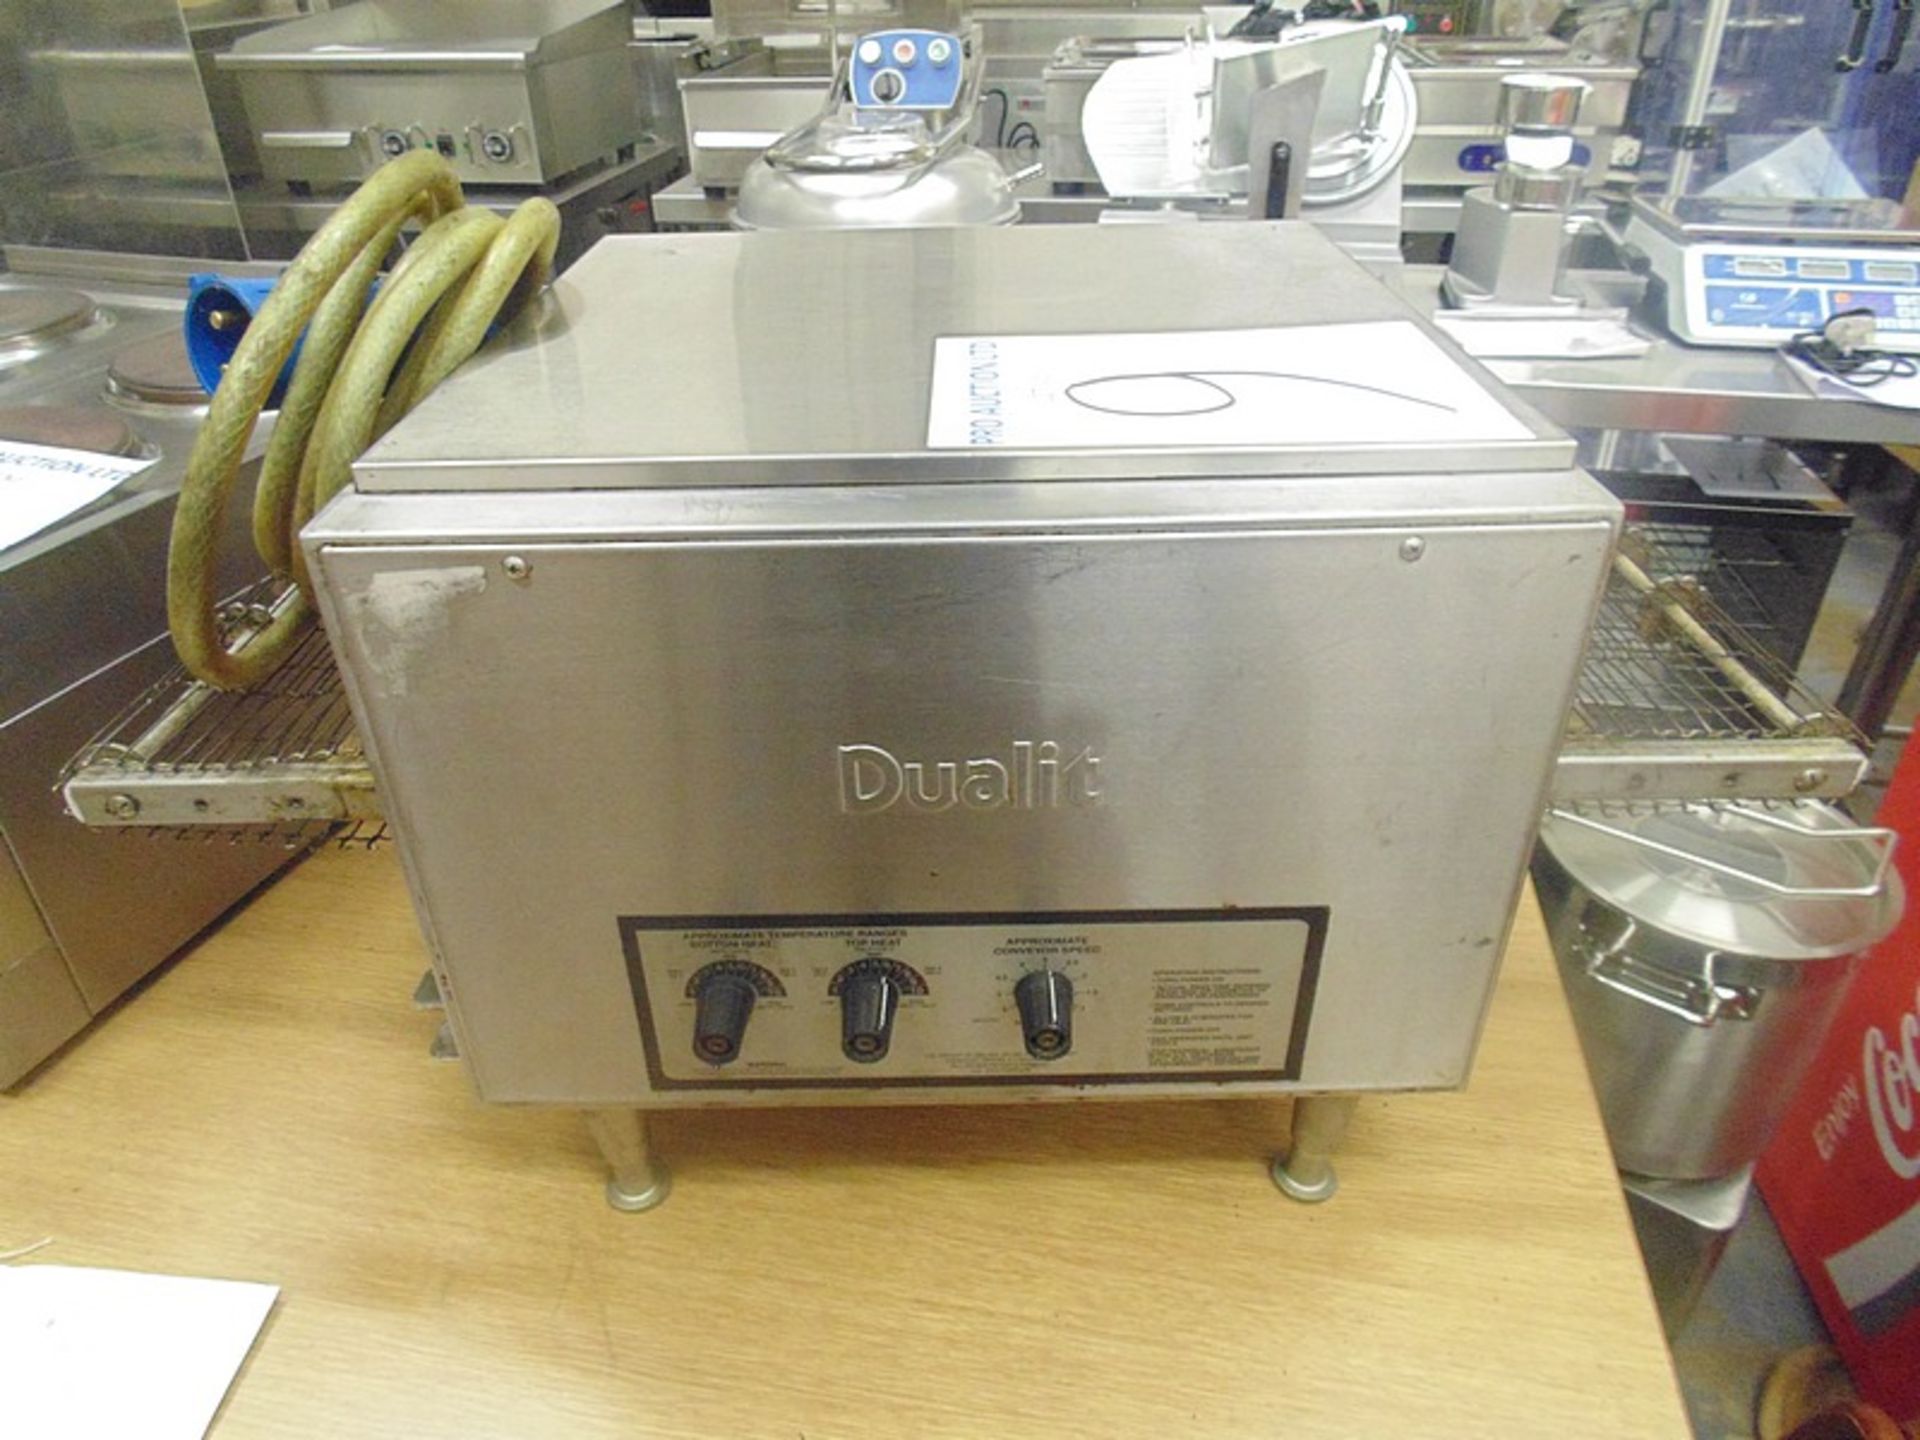 Dualit BM3-214HX stainless steel continuous conveyor toaster output per hour 360 slices loading 2.